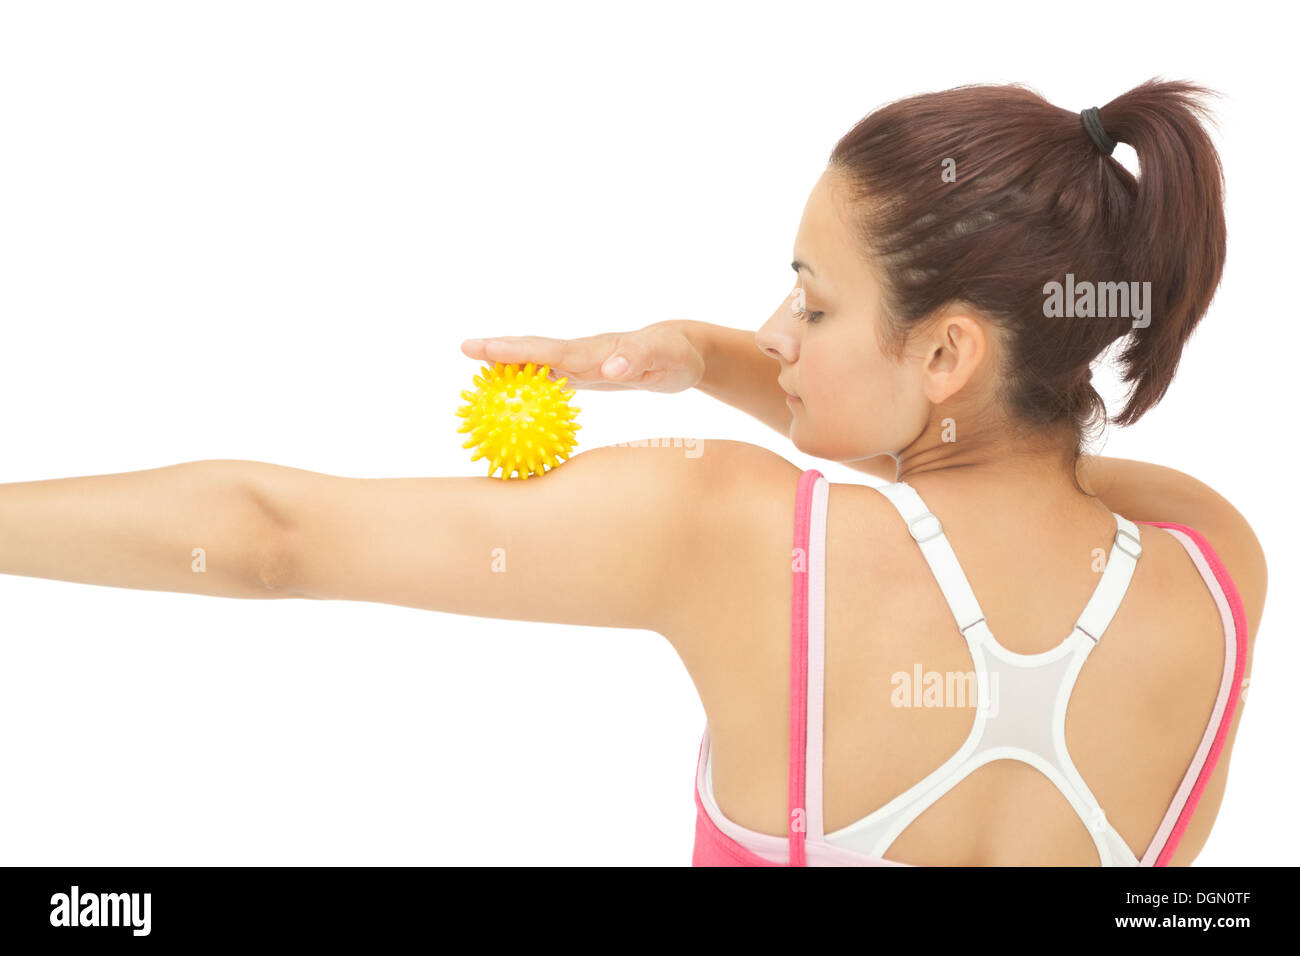 Rear view of sporty brunette touching arm with yellow massage ball Stock Photo